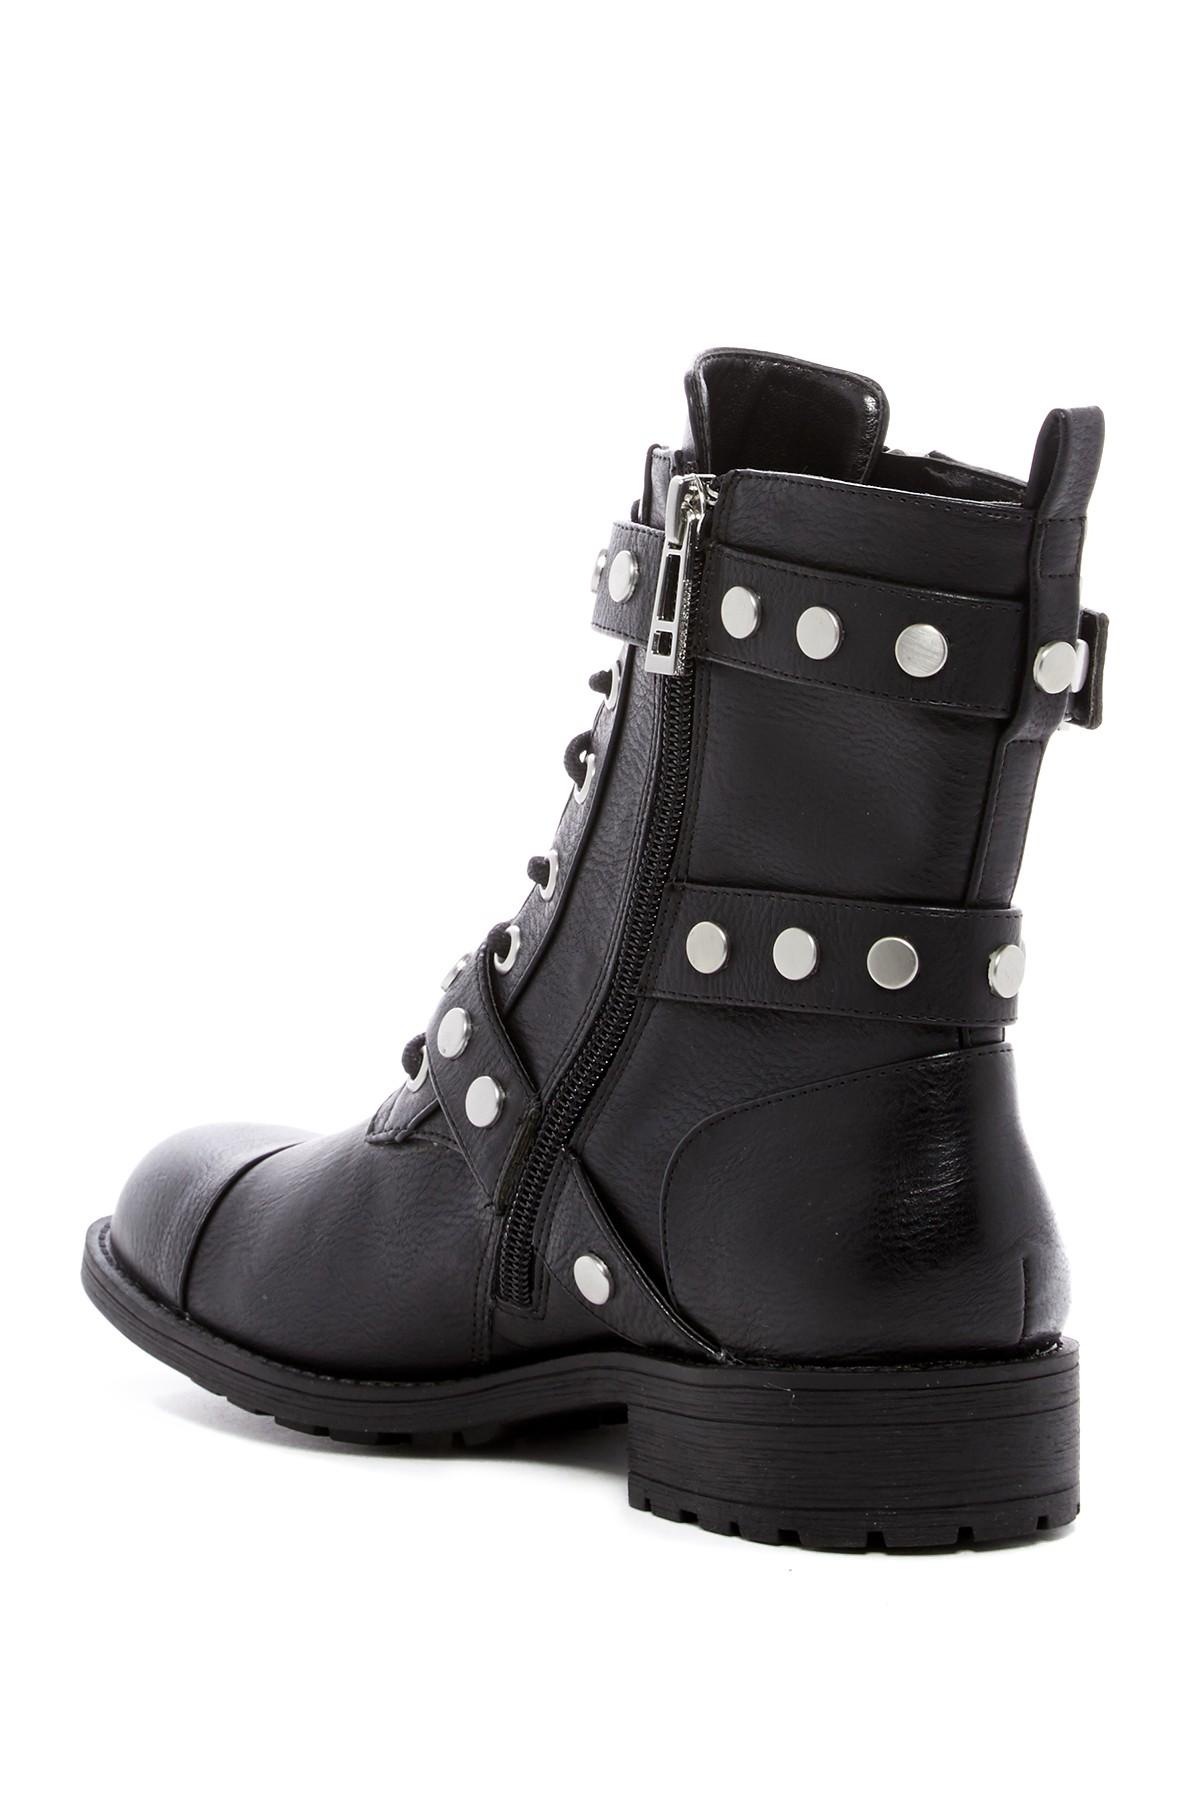 charles by charles david colt strappy moto boot